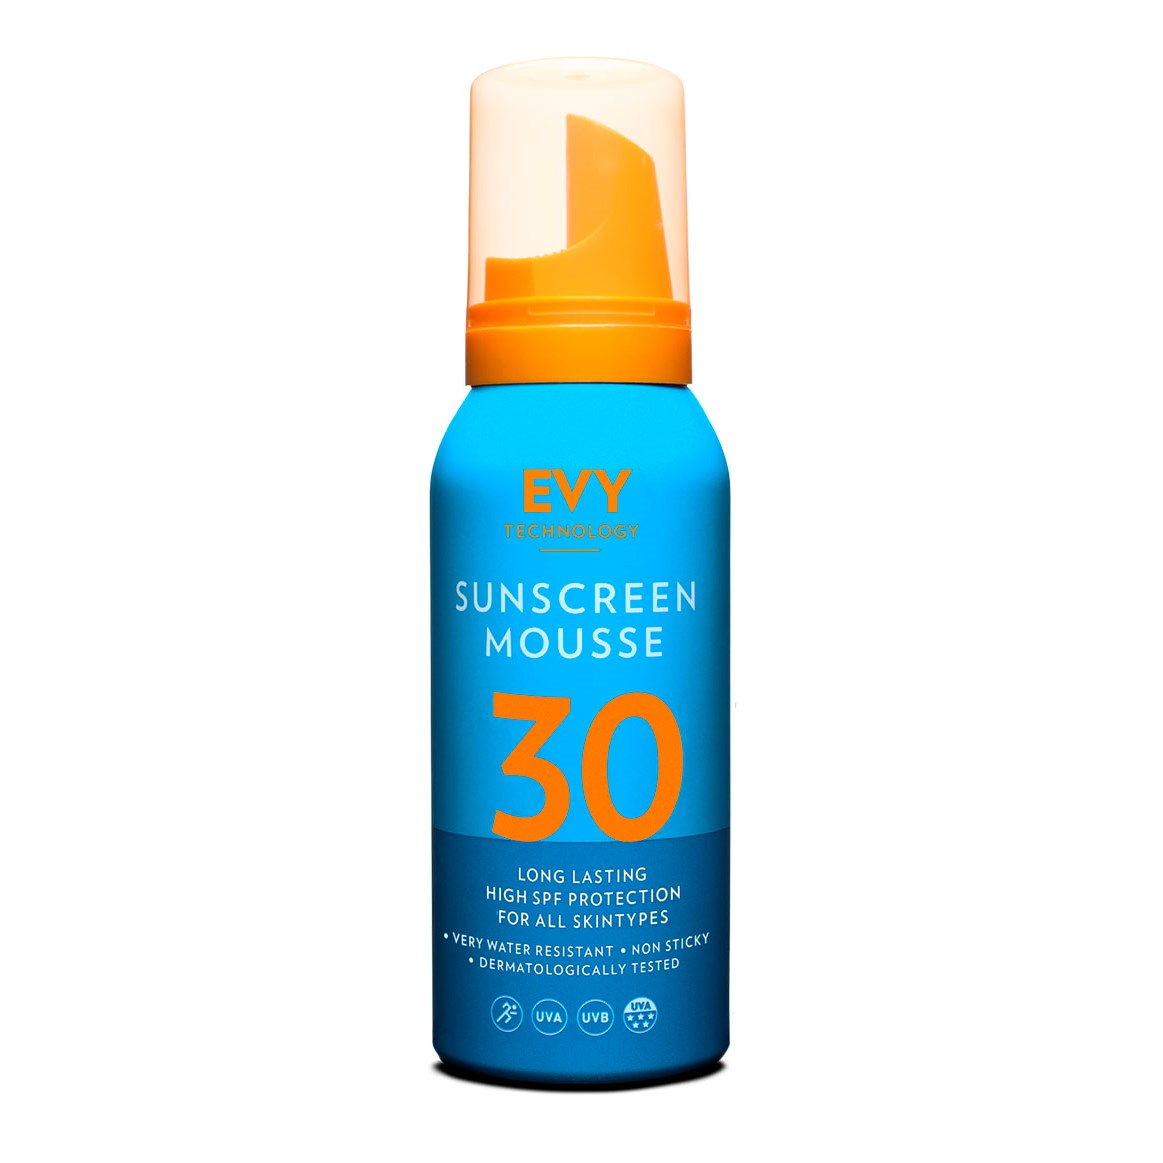 EVY Sunscreen Mousse SPF 30 - 100ml